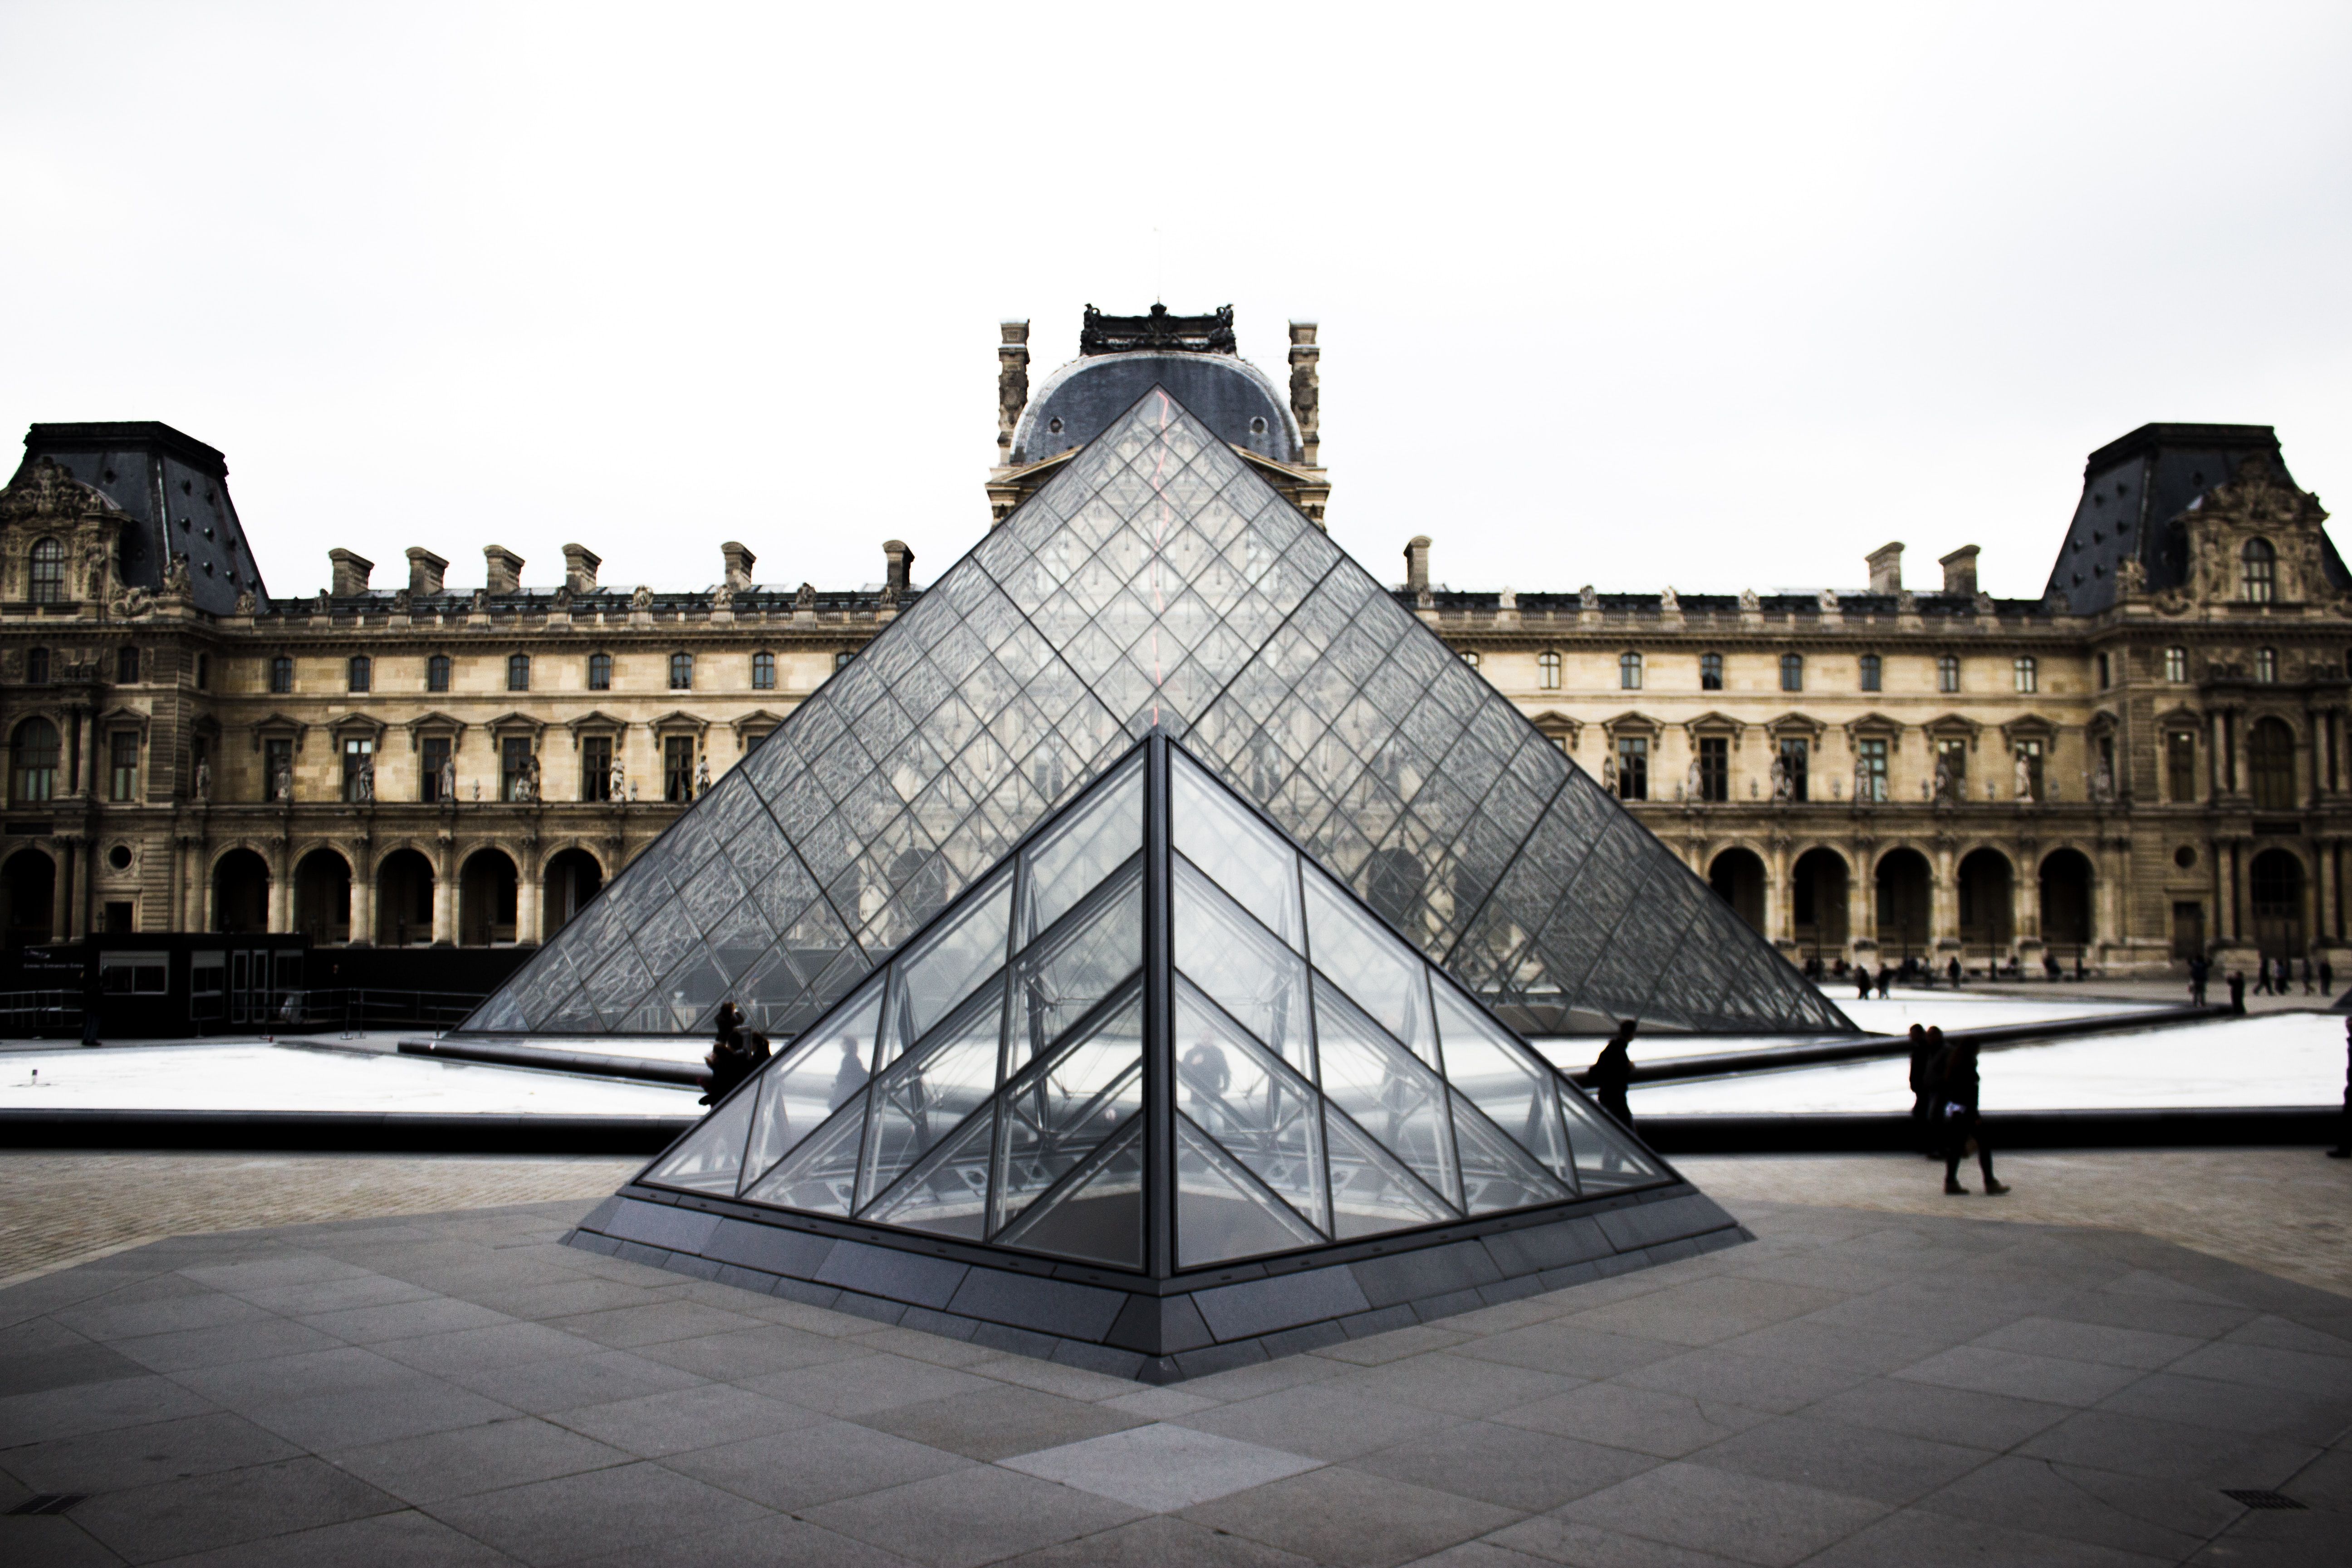 The Louvre is offering luxury cruises in 2020